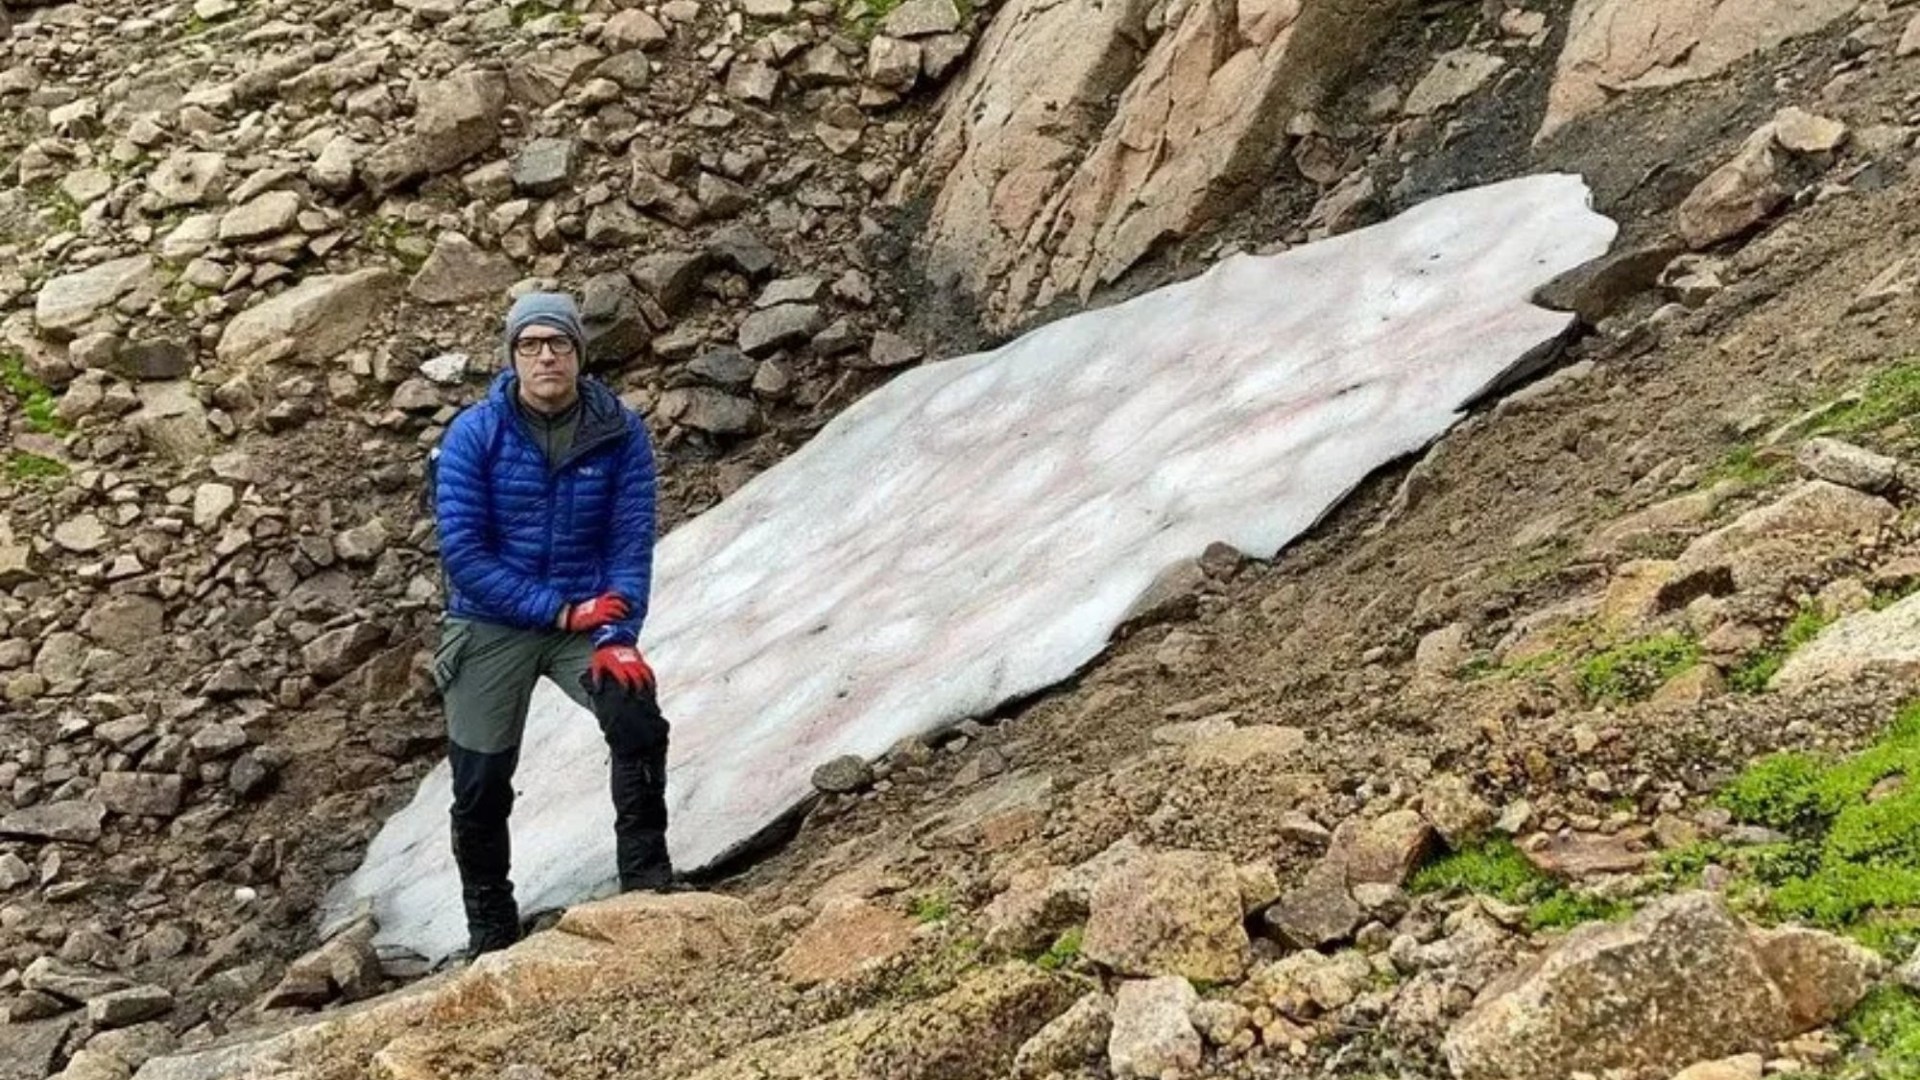 Britain’s longest-lasting snow patch melts for only the tenth time in 300 years amid September’s heatwave